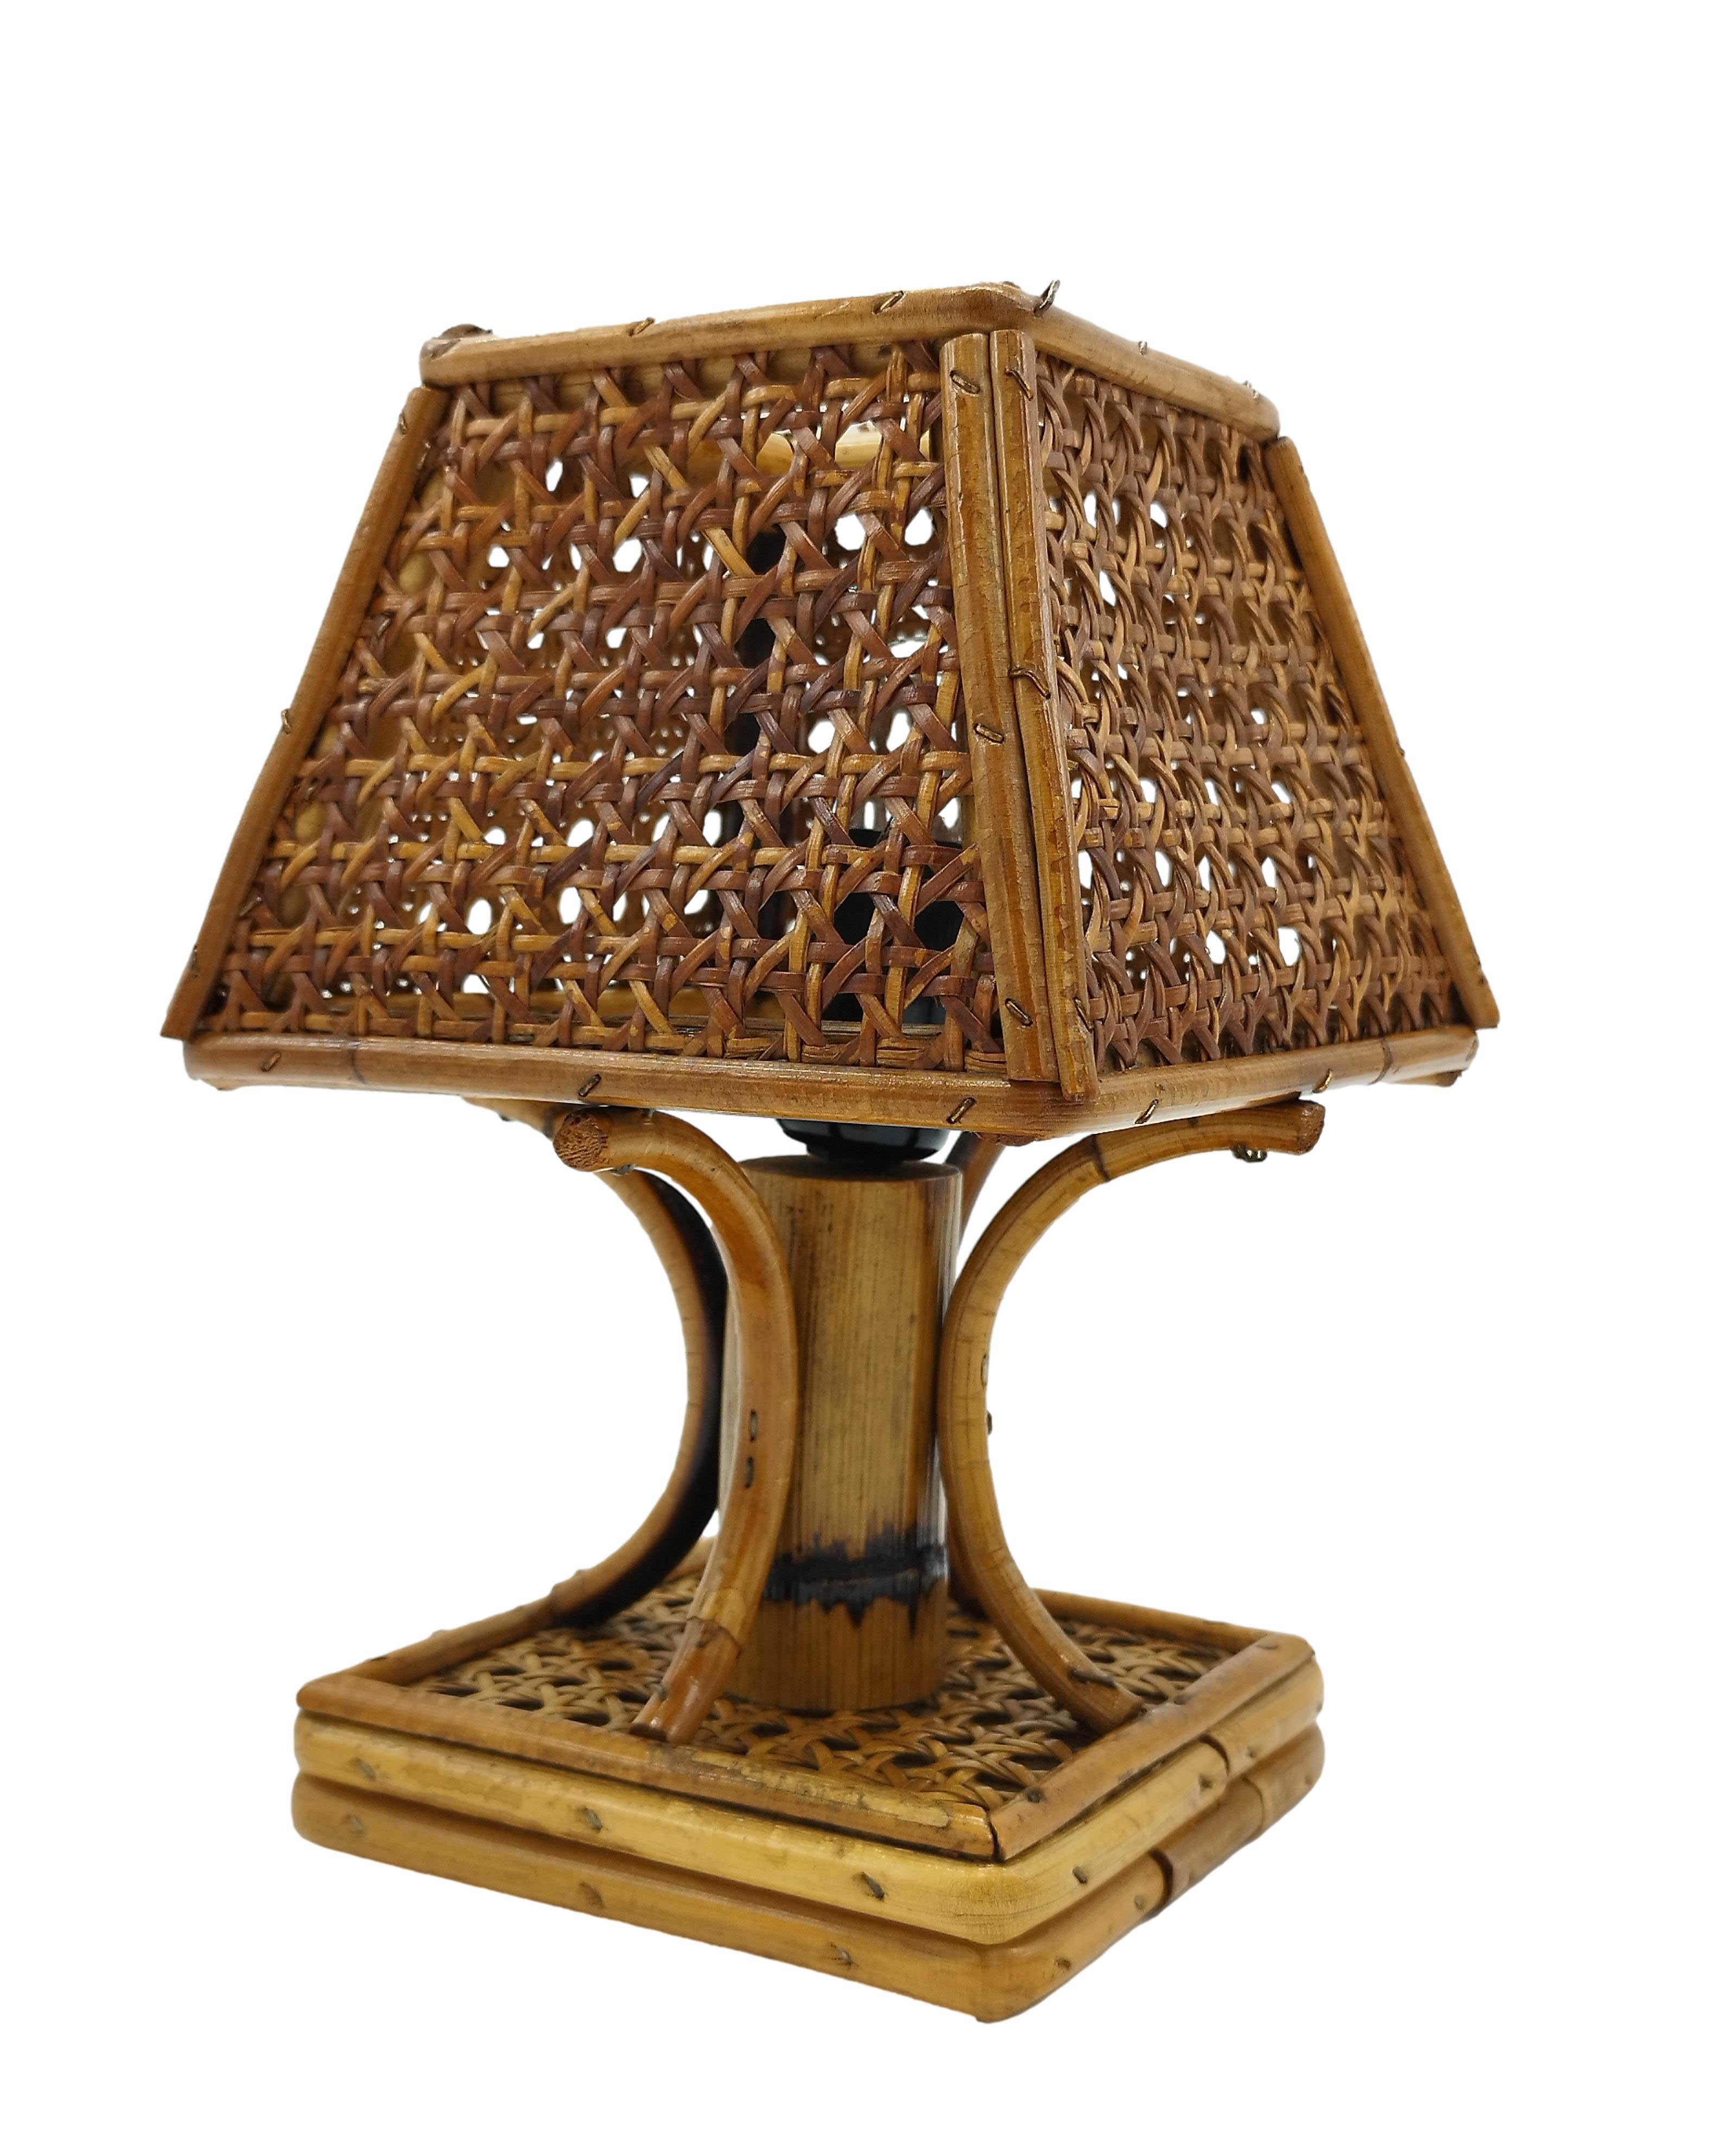 A bedside lamp handmade in Italy between the 1950s and 1960s.
The structure of the lamp was made of curved rattan canes and the lampshade, made of wicker cane webbing, is in the shape of a pagoda reminiscent of the Chinese Chippendale style.
This